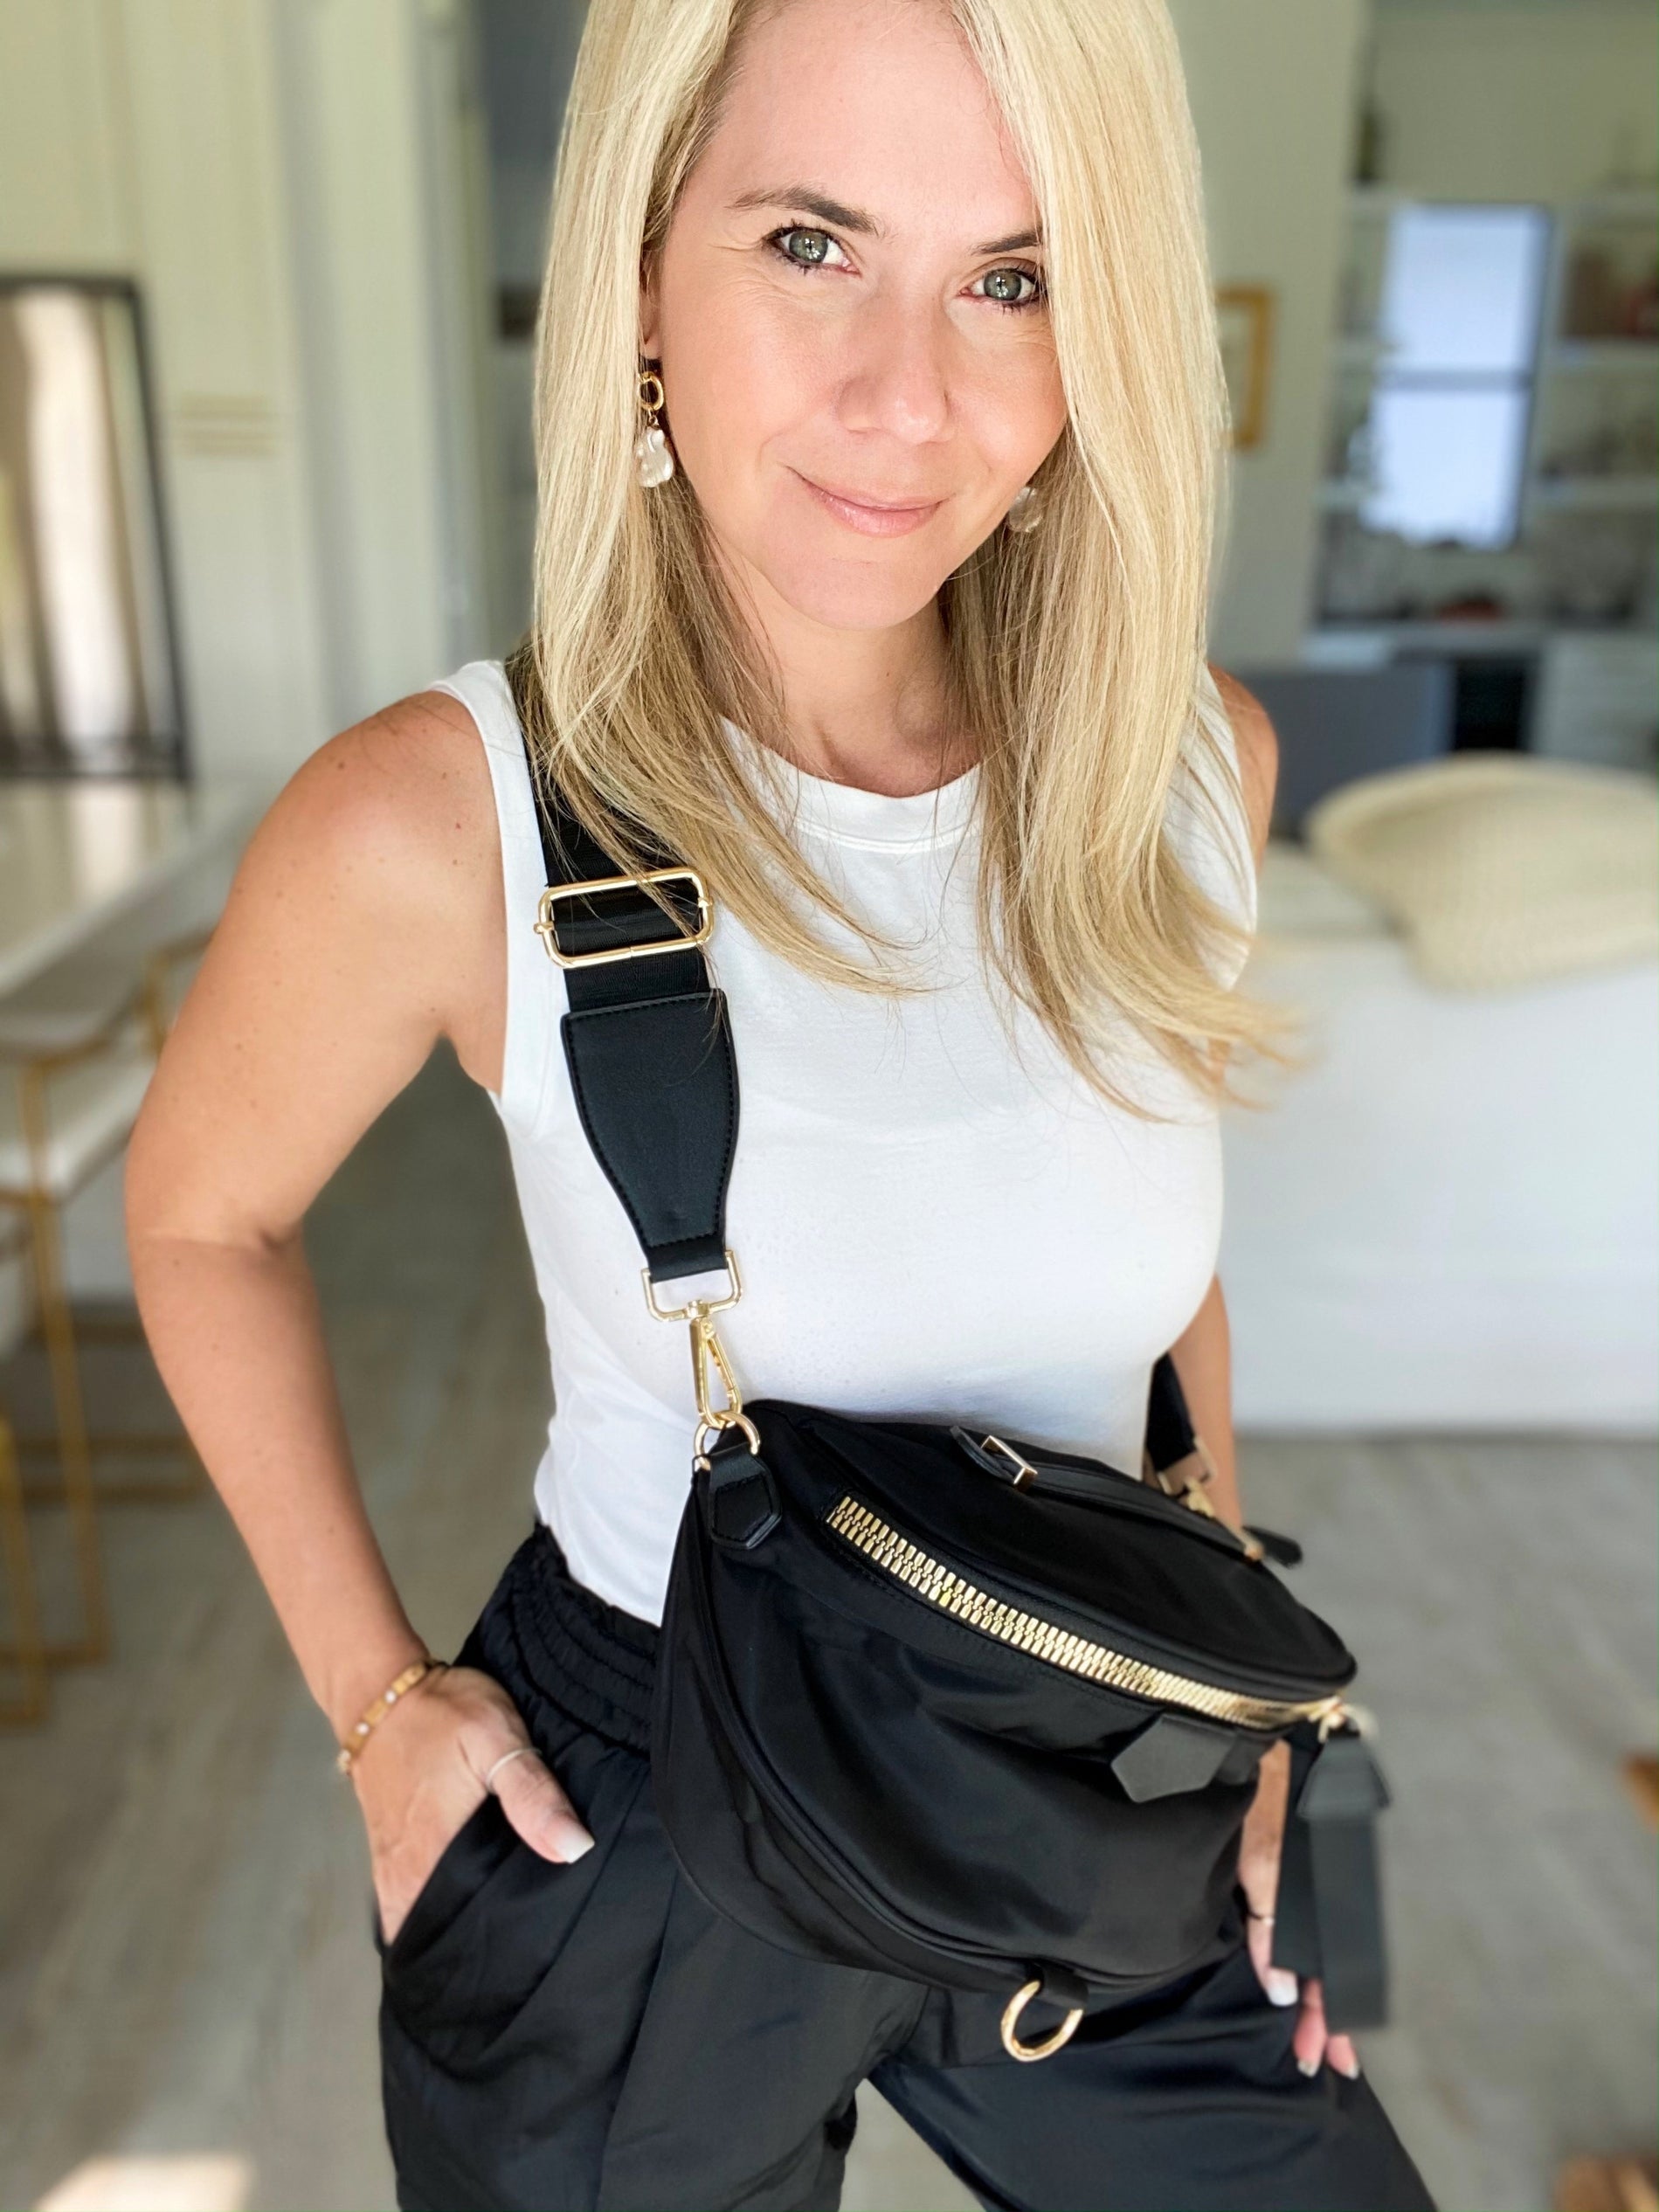 VIP Kidney Crossbody Bag-240 Bags-BC Handbags-Coastal Bloom Boutique, find the trendiest versions of the popular styles and looks Located in Indialantic, FL